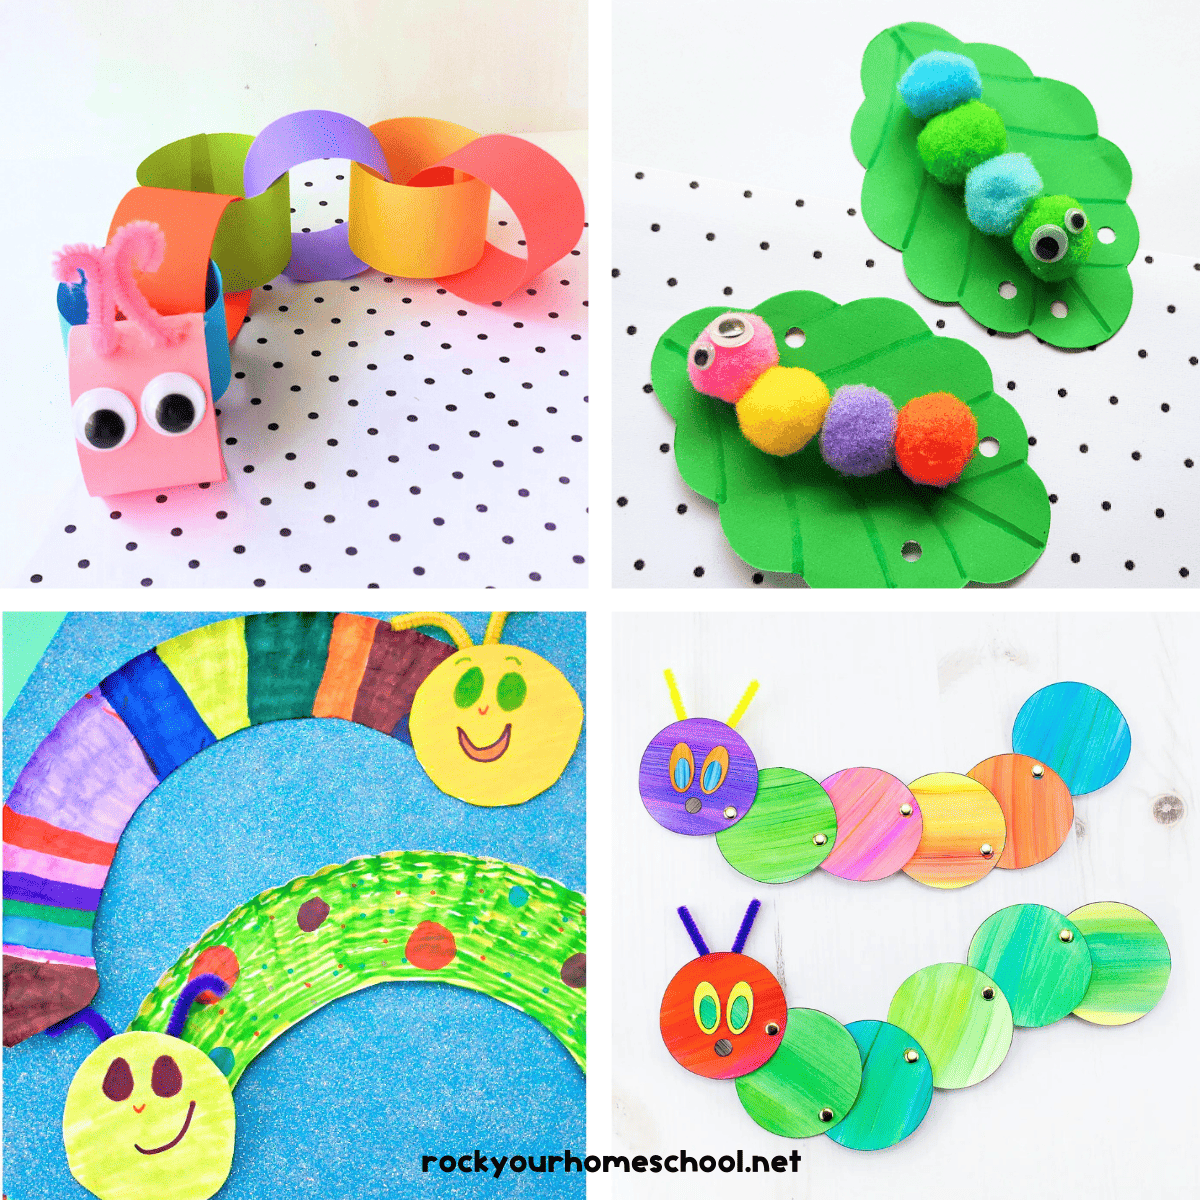 Caterpillar Crafts for Kids: 12 Easy and Cute Ideas